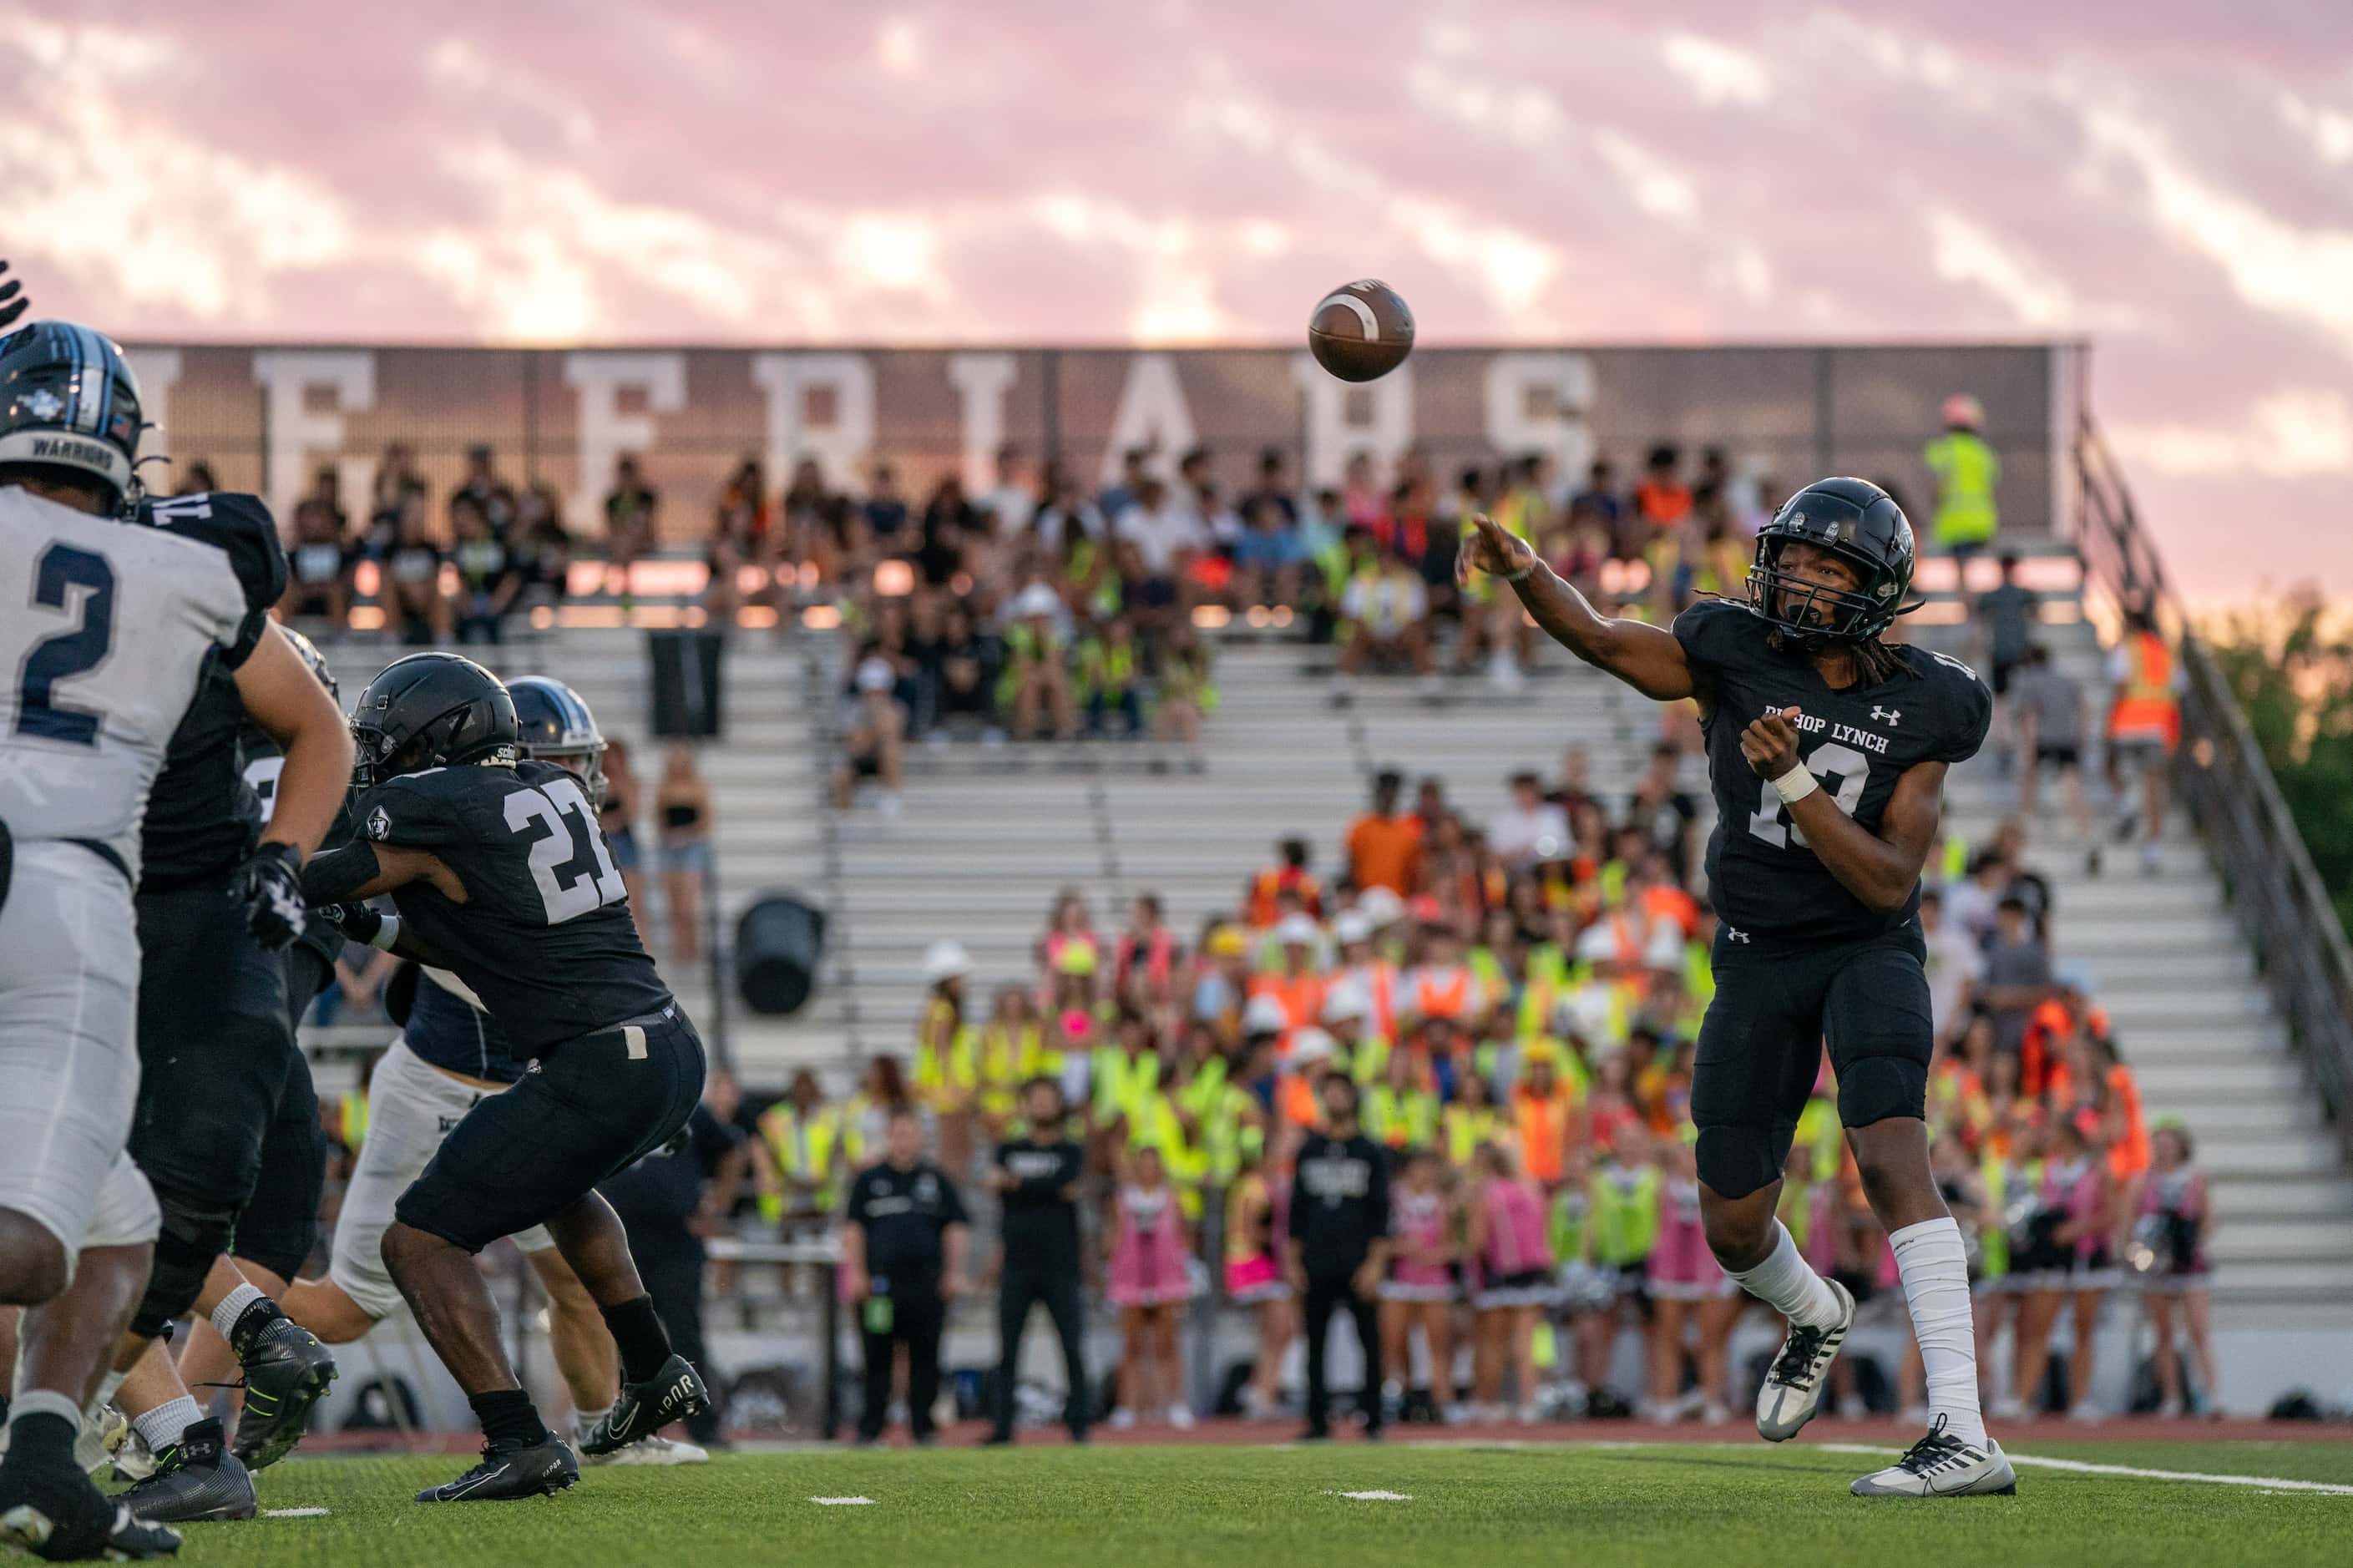 Bishop Lynch sophomore quarterback Legend Howell (13) throws a pass against Argyle Liberty...